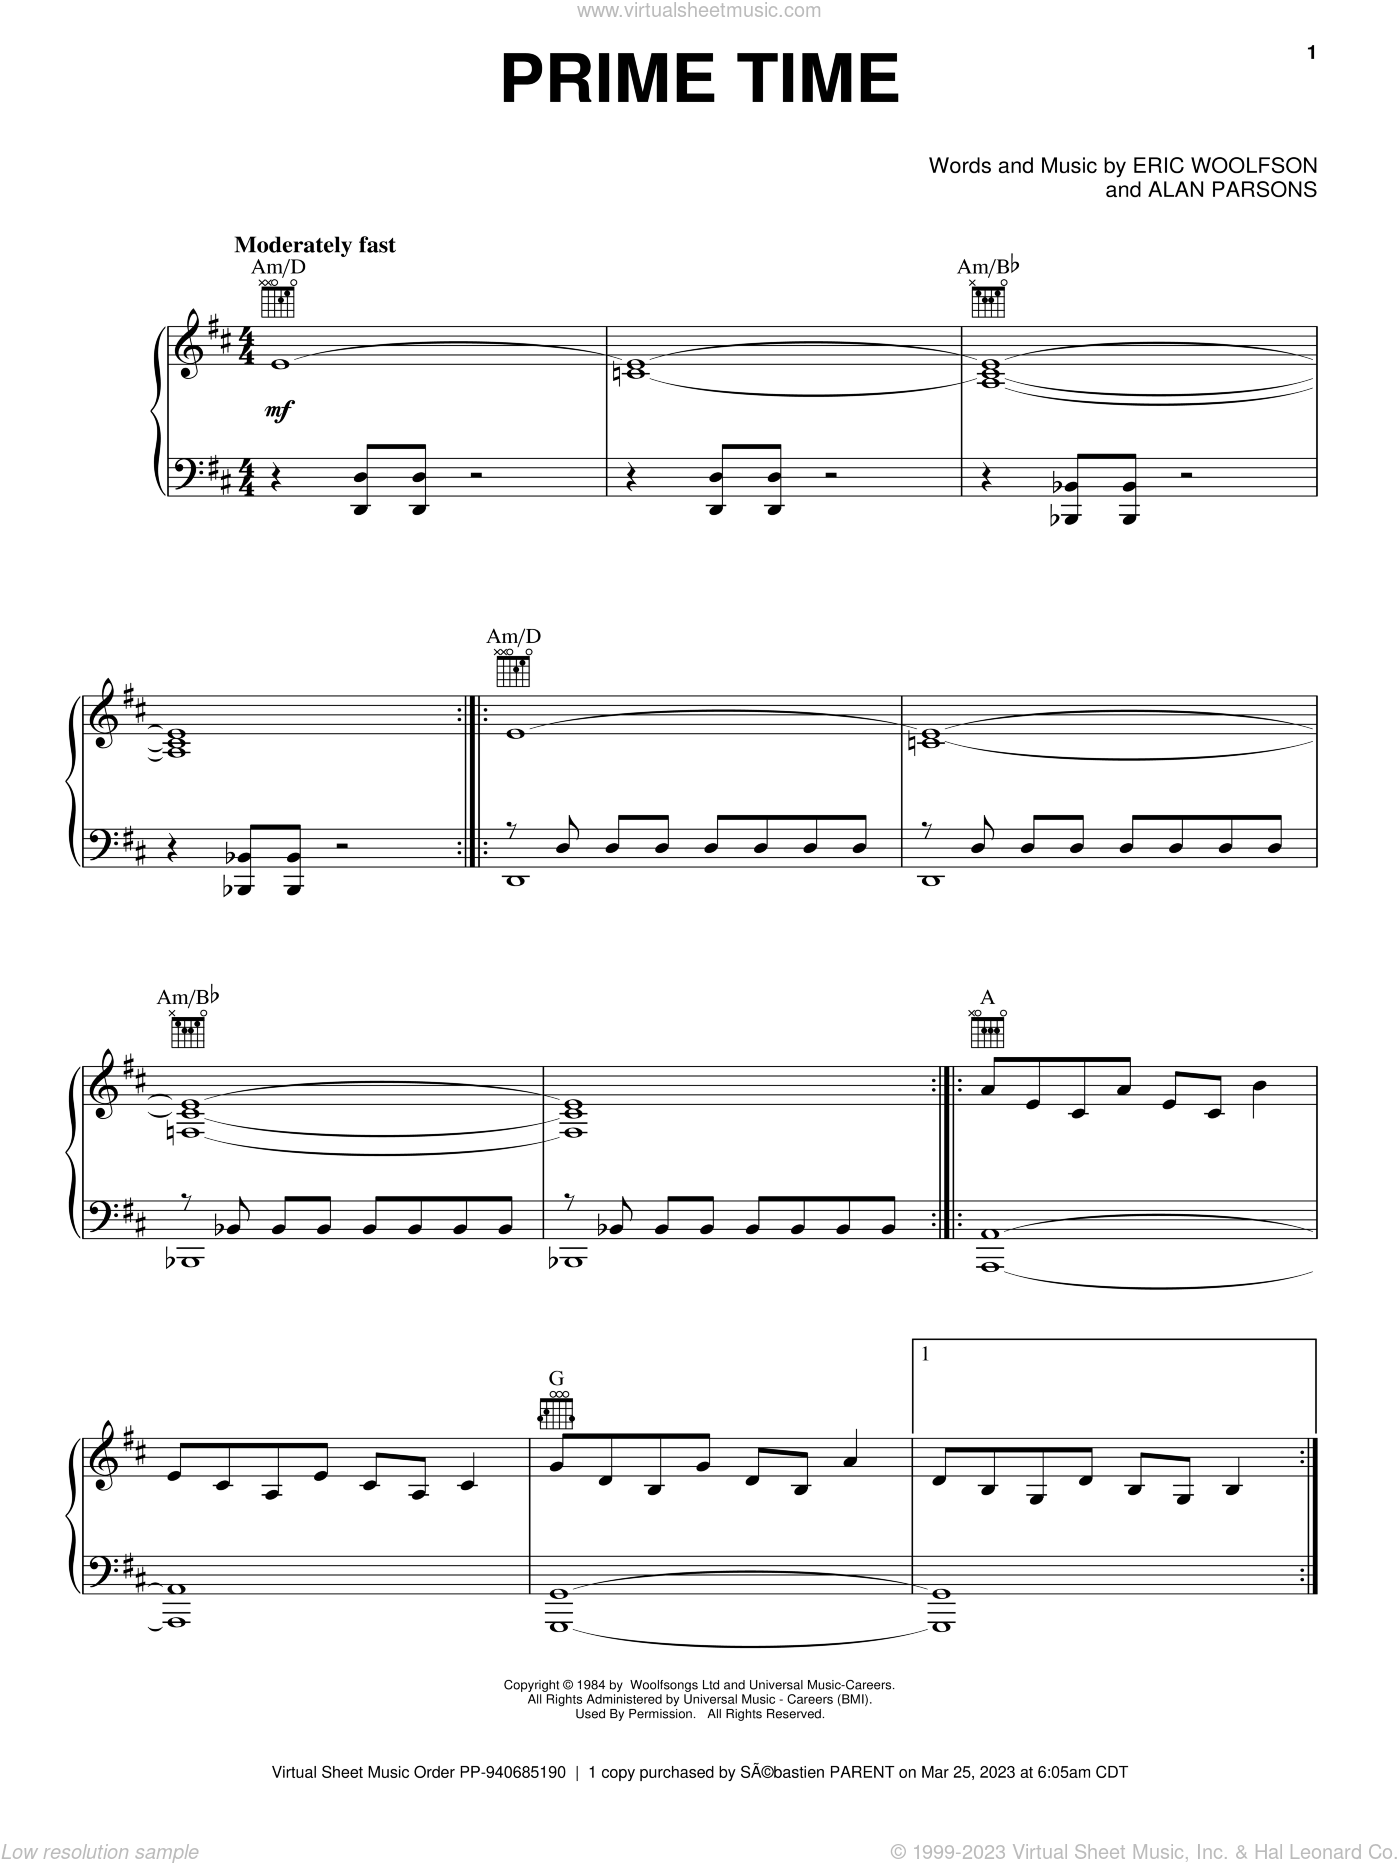 Prime Time sheet music for voice, piano or guitar (PDF)